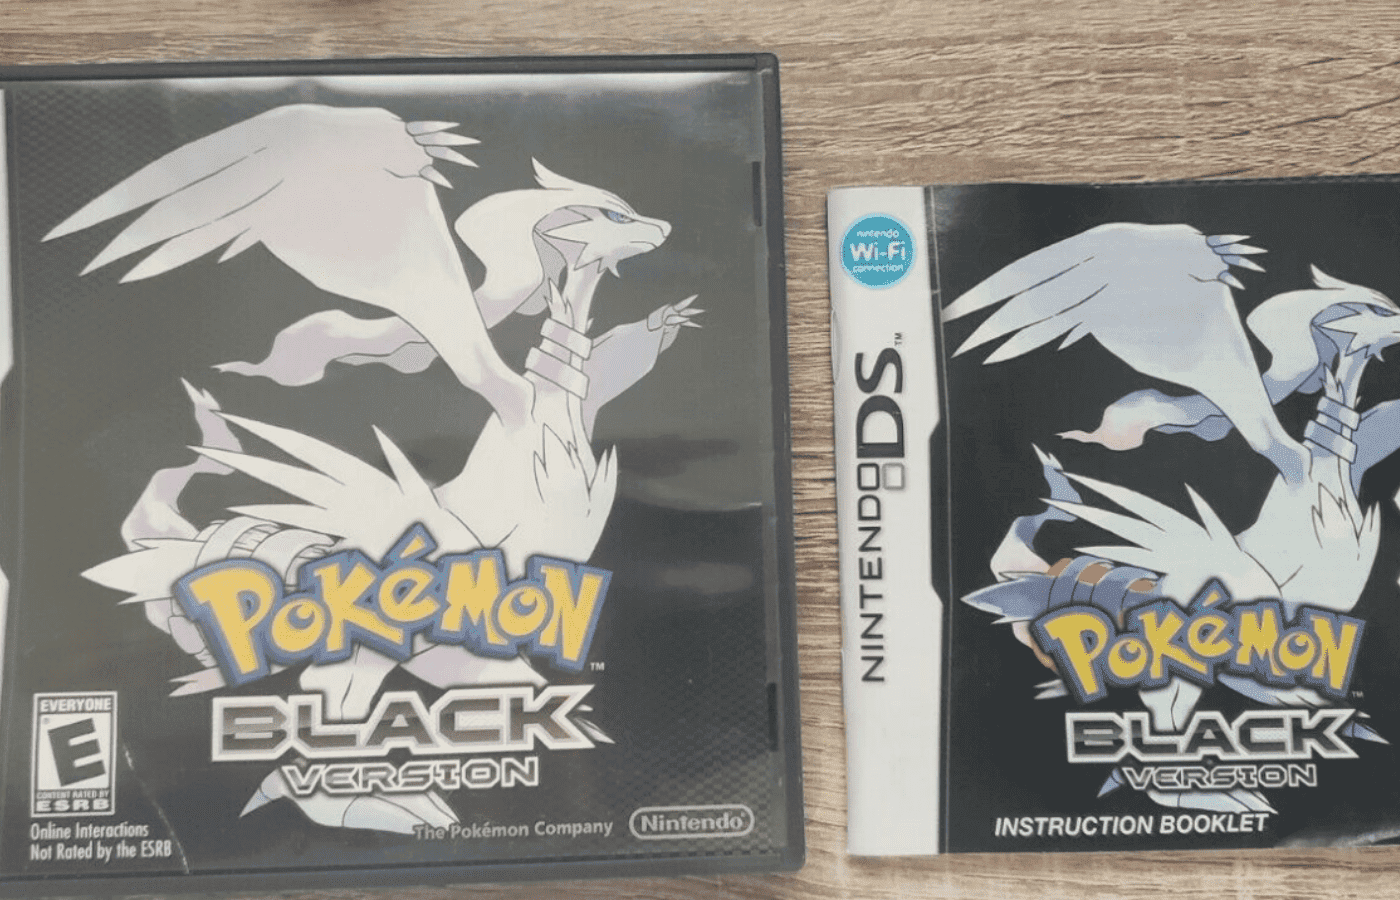 Why Is Pokemon Black and Black 2 So Expensive